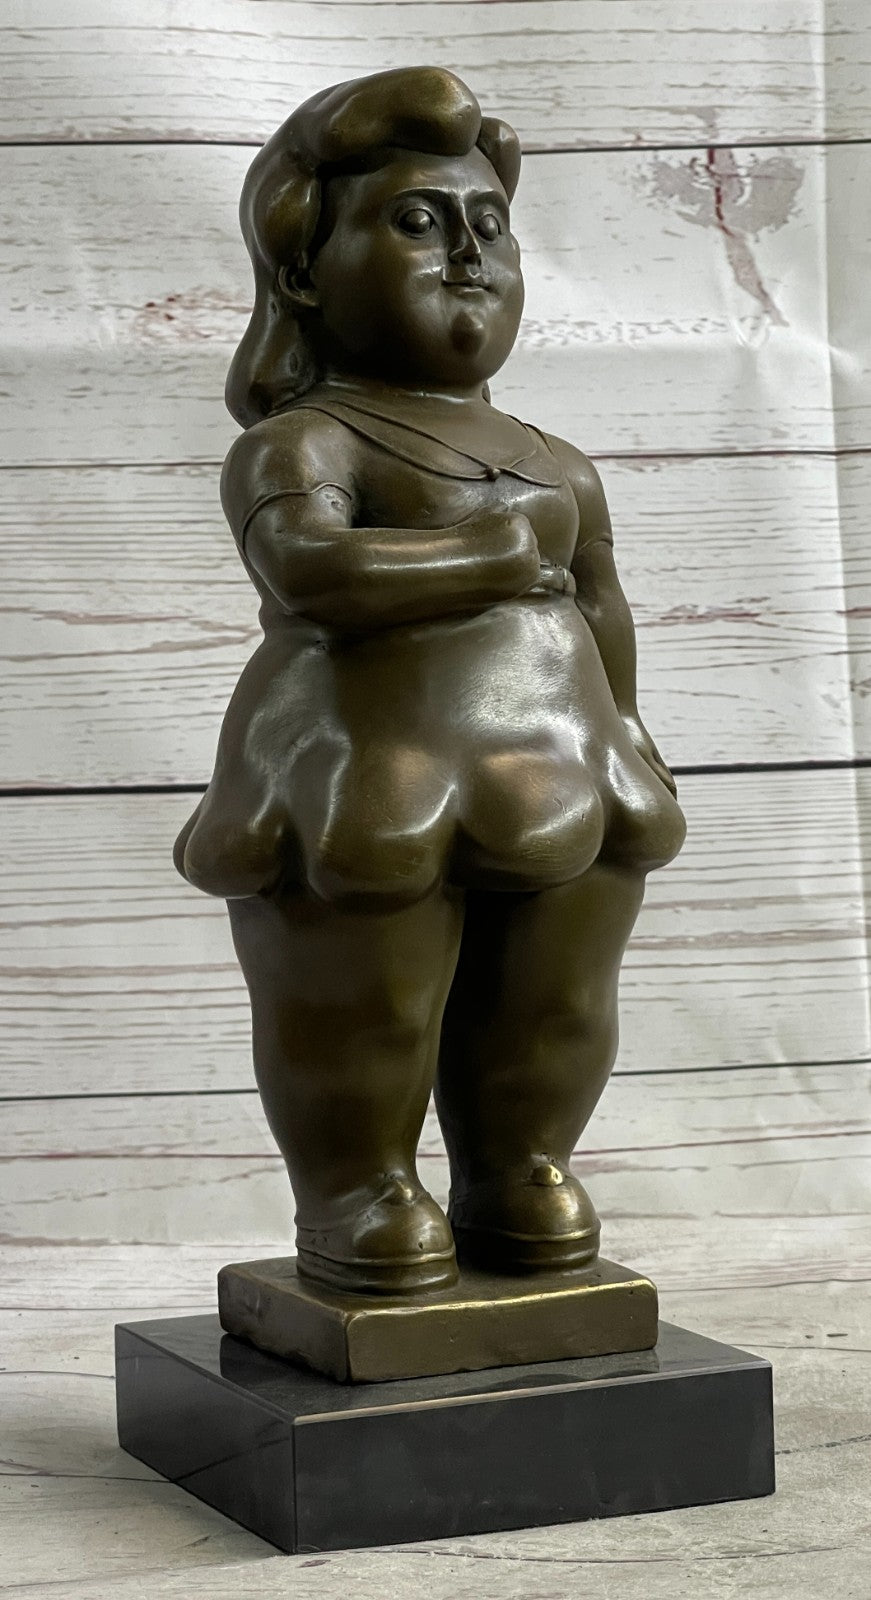 Handcrafted bronze sculpture SALE Young Woman Botero Fernando Signed Artwork